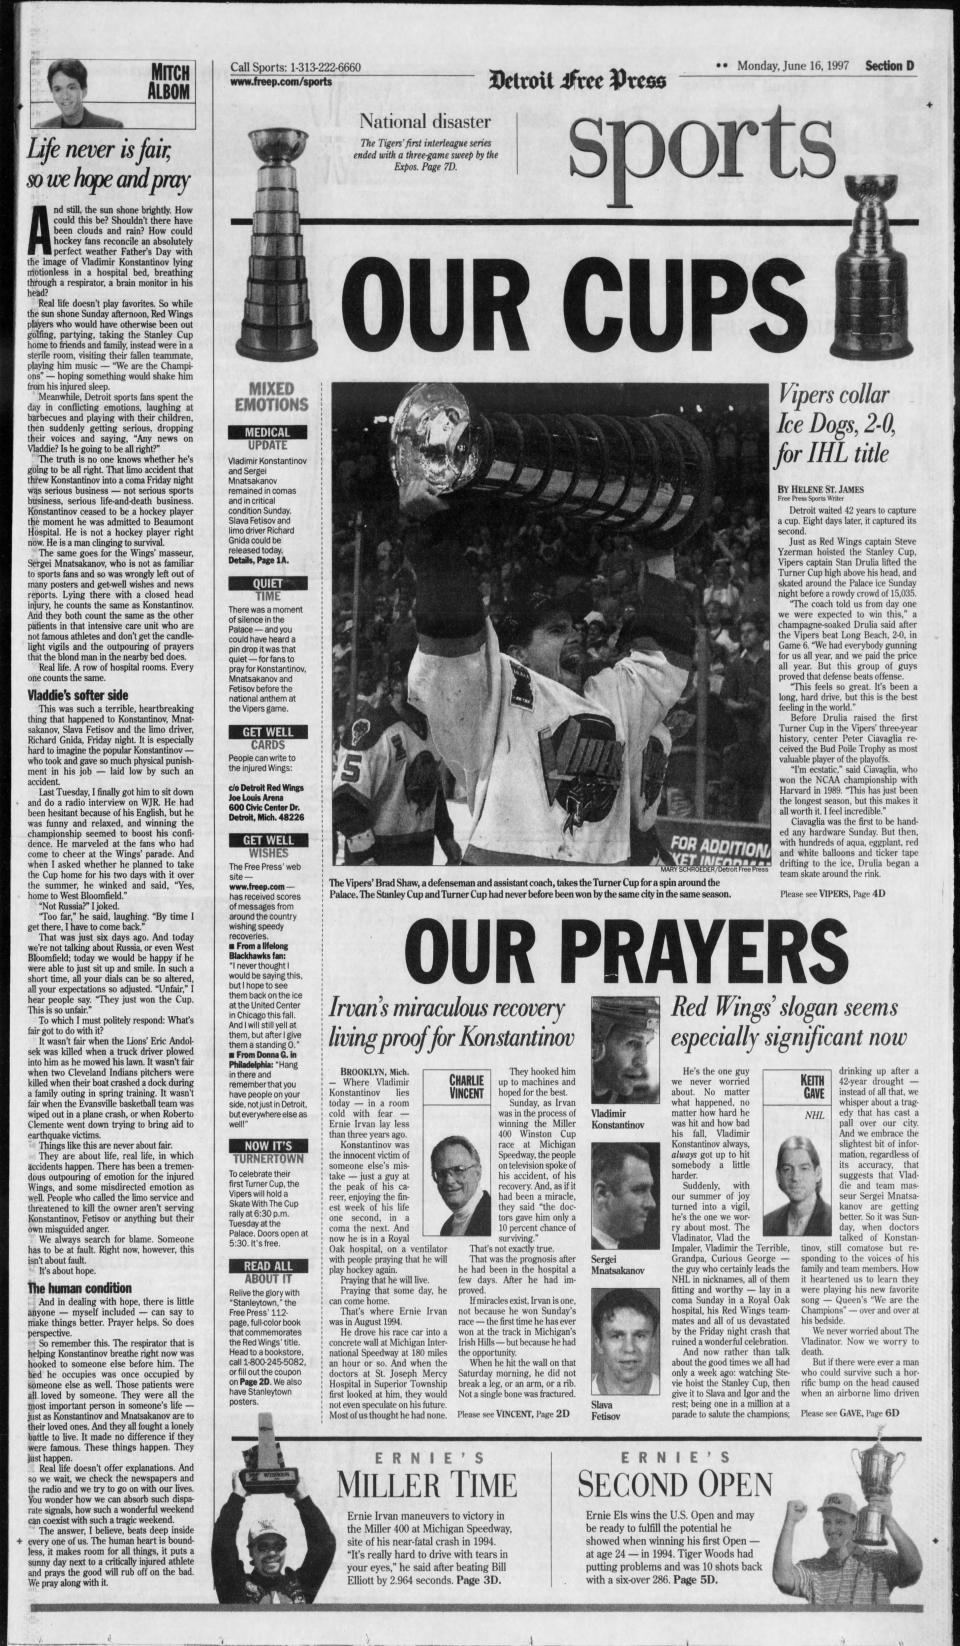 Front page of the sports section of the Detroit Free Press on June 16, 1997.